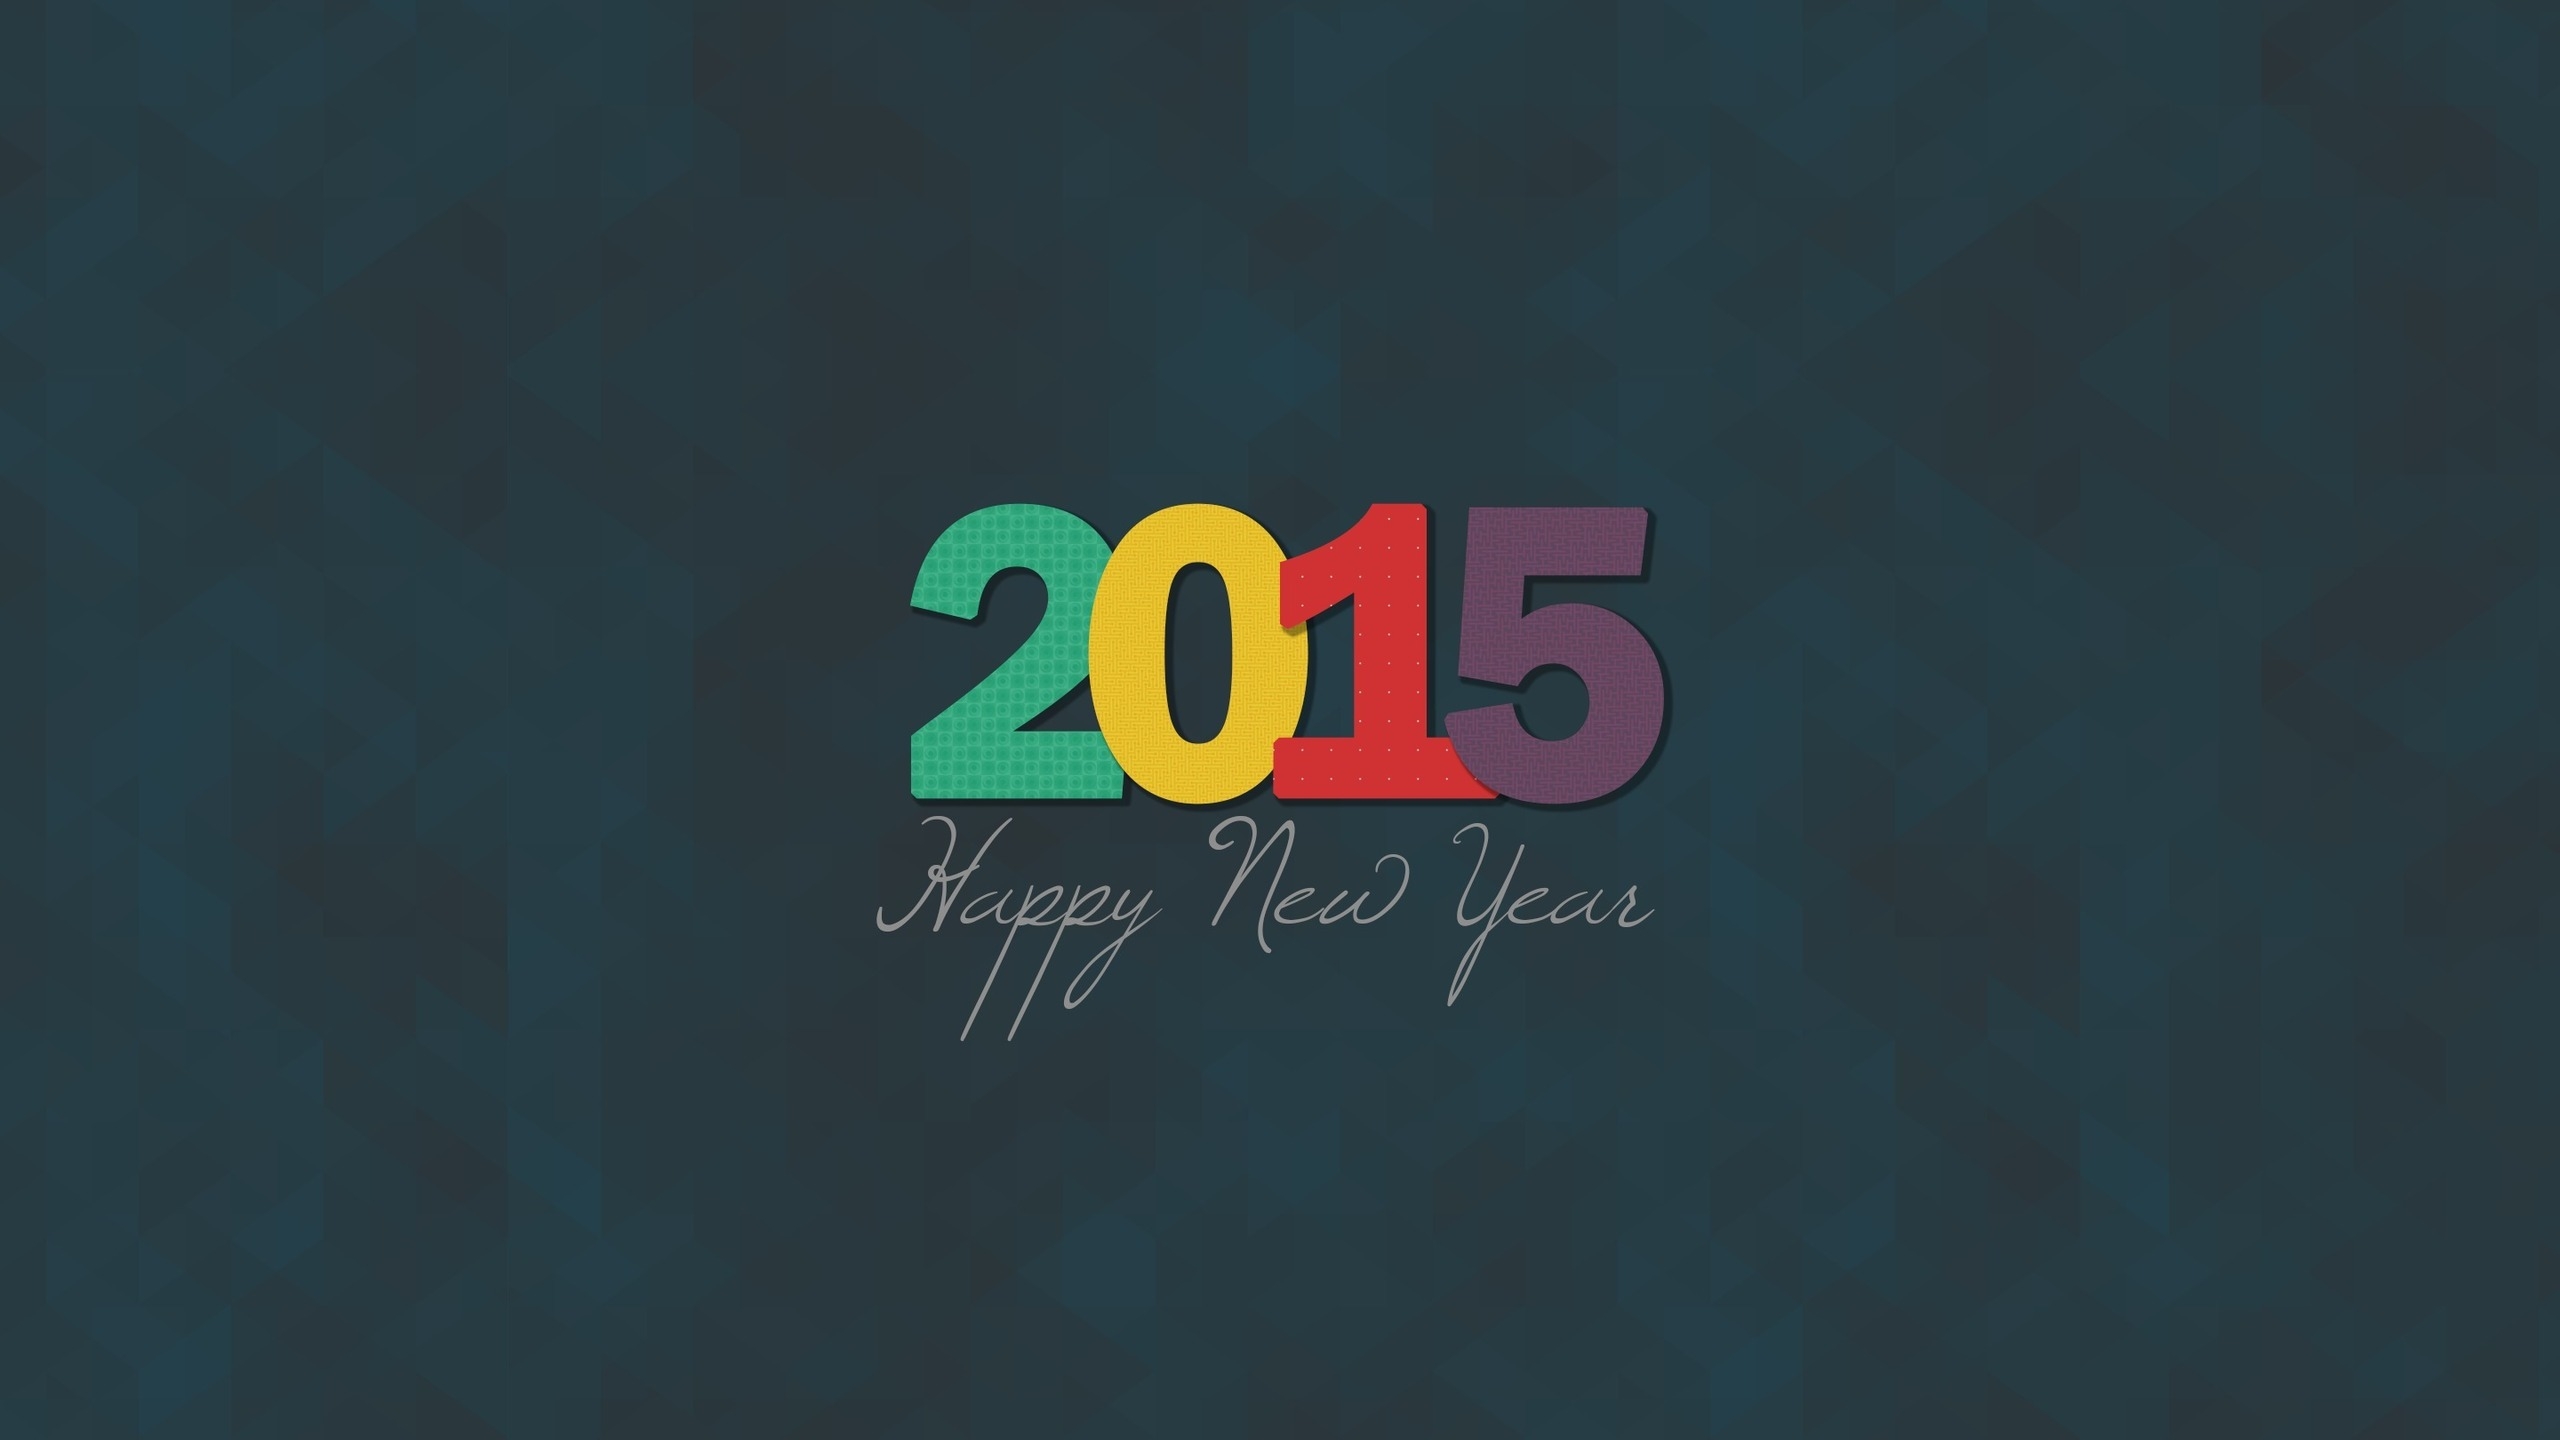 2015 Minimalistic New Year for 2560x1440 HDTV resolution